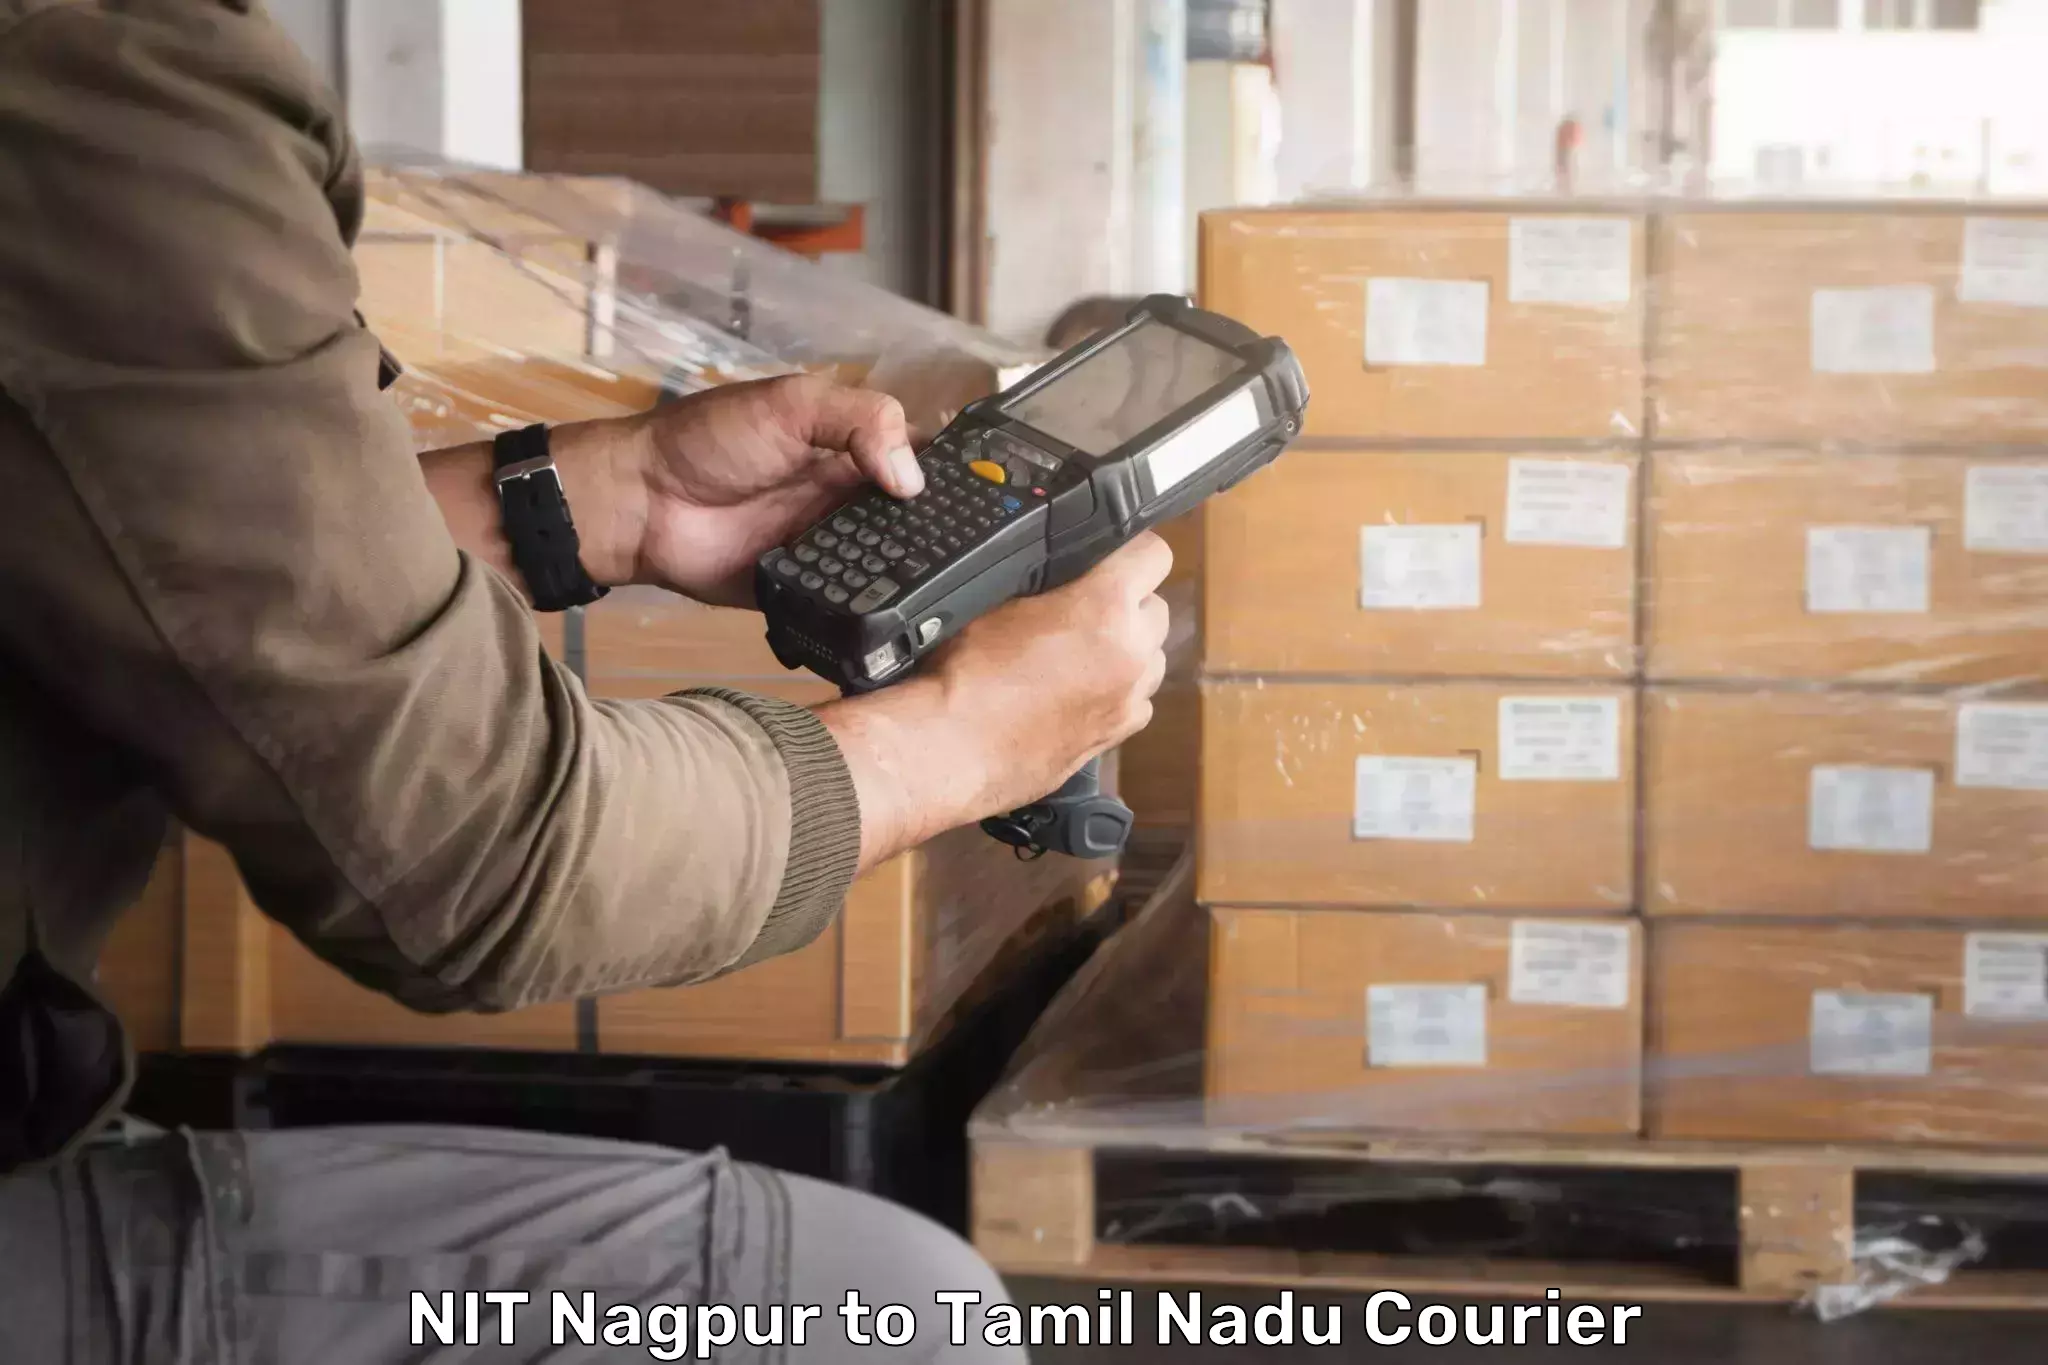 Residential courier service NIT Nagpur to Chidambaram